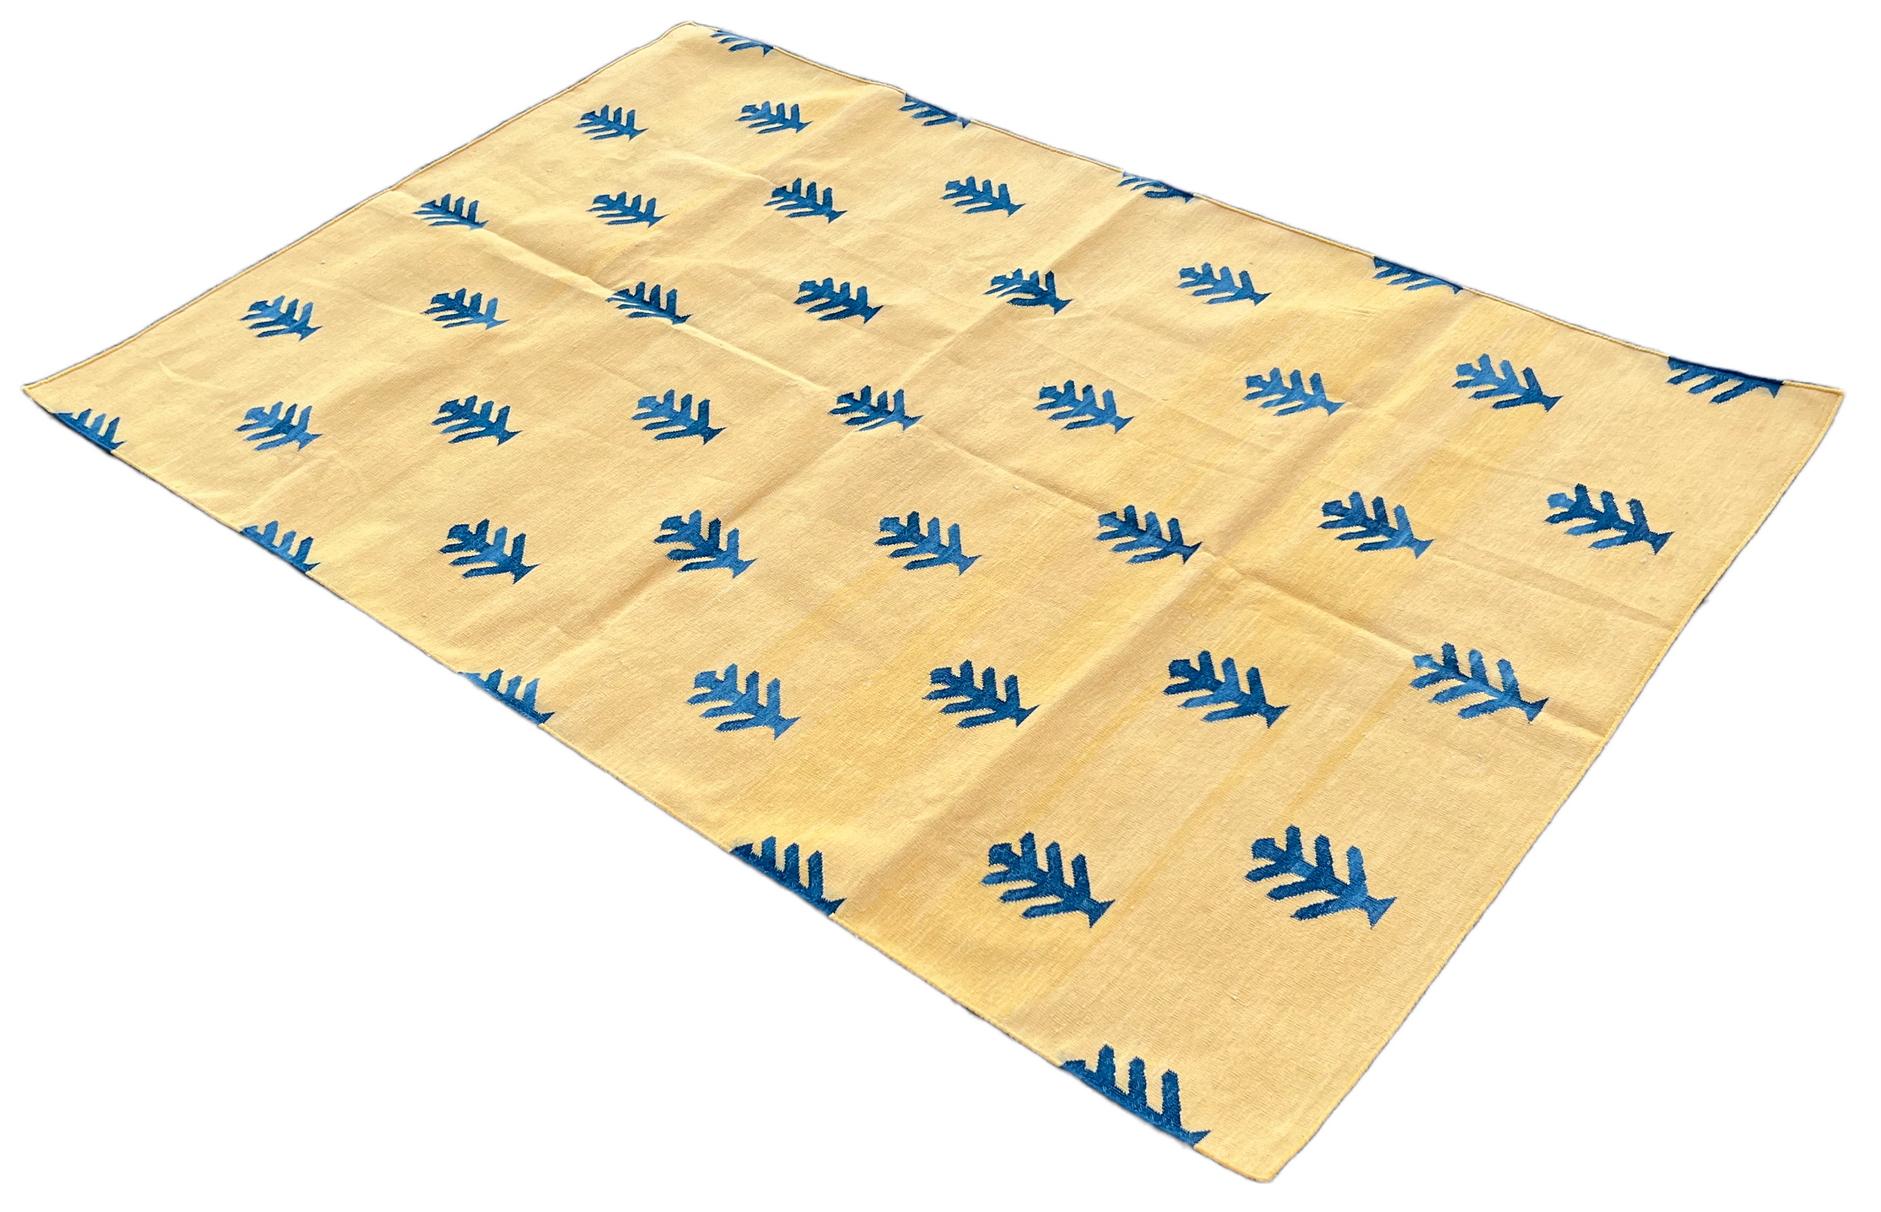 Cotton Vegetable Dyed Reversible Yellow And Blue Tree Patterned Indian Rug - 4'x6'
These special flat-weave dhurries are hand-woven with 15 ply 100% cotton yarn. Due to the special manufacturing techniques used to create our rugs, the size and color